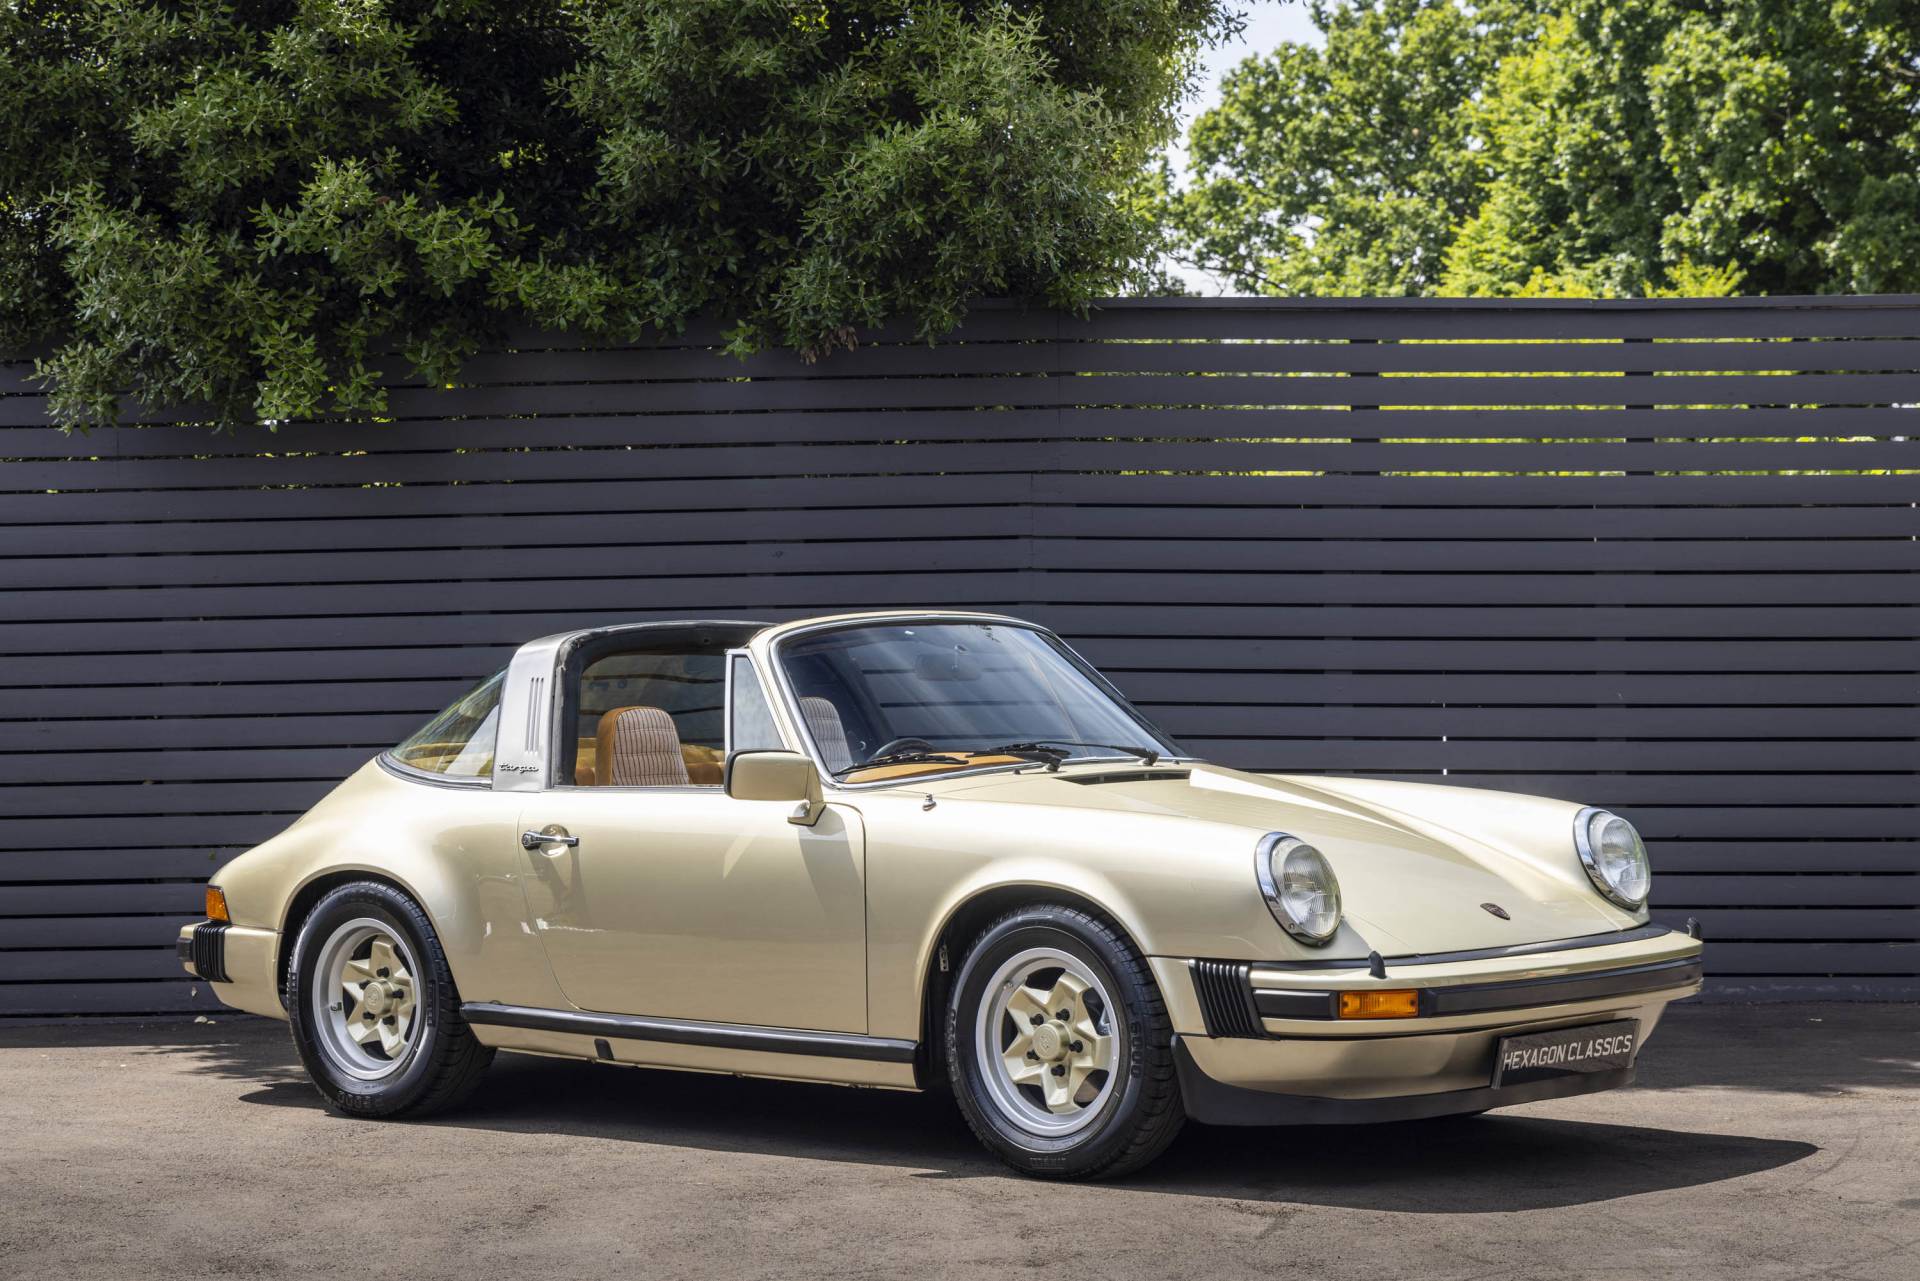 For Sale: Porsche 911 Carrera  (1976) offered for GBP 69,995